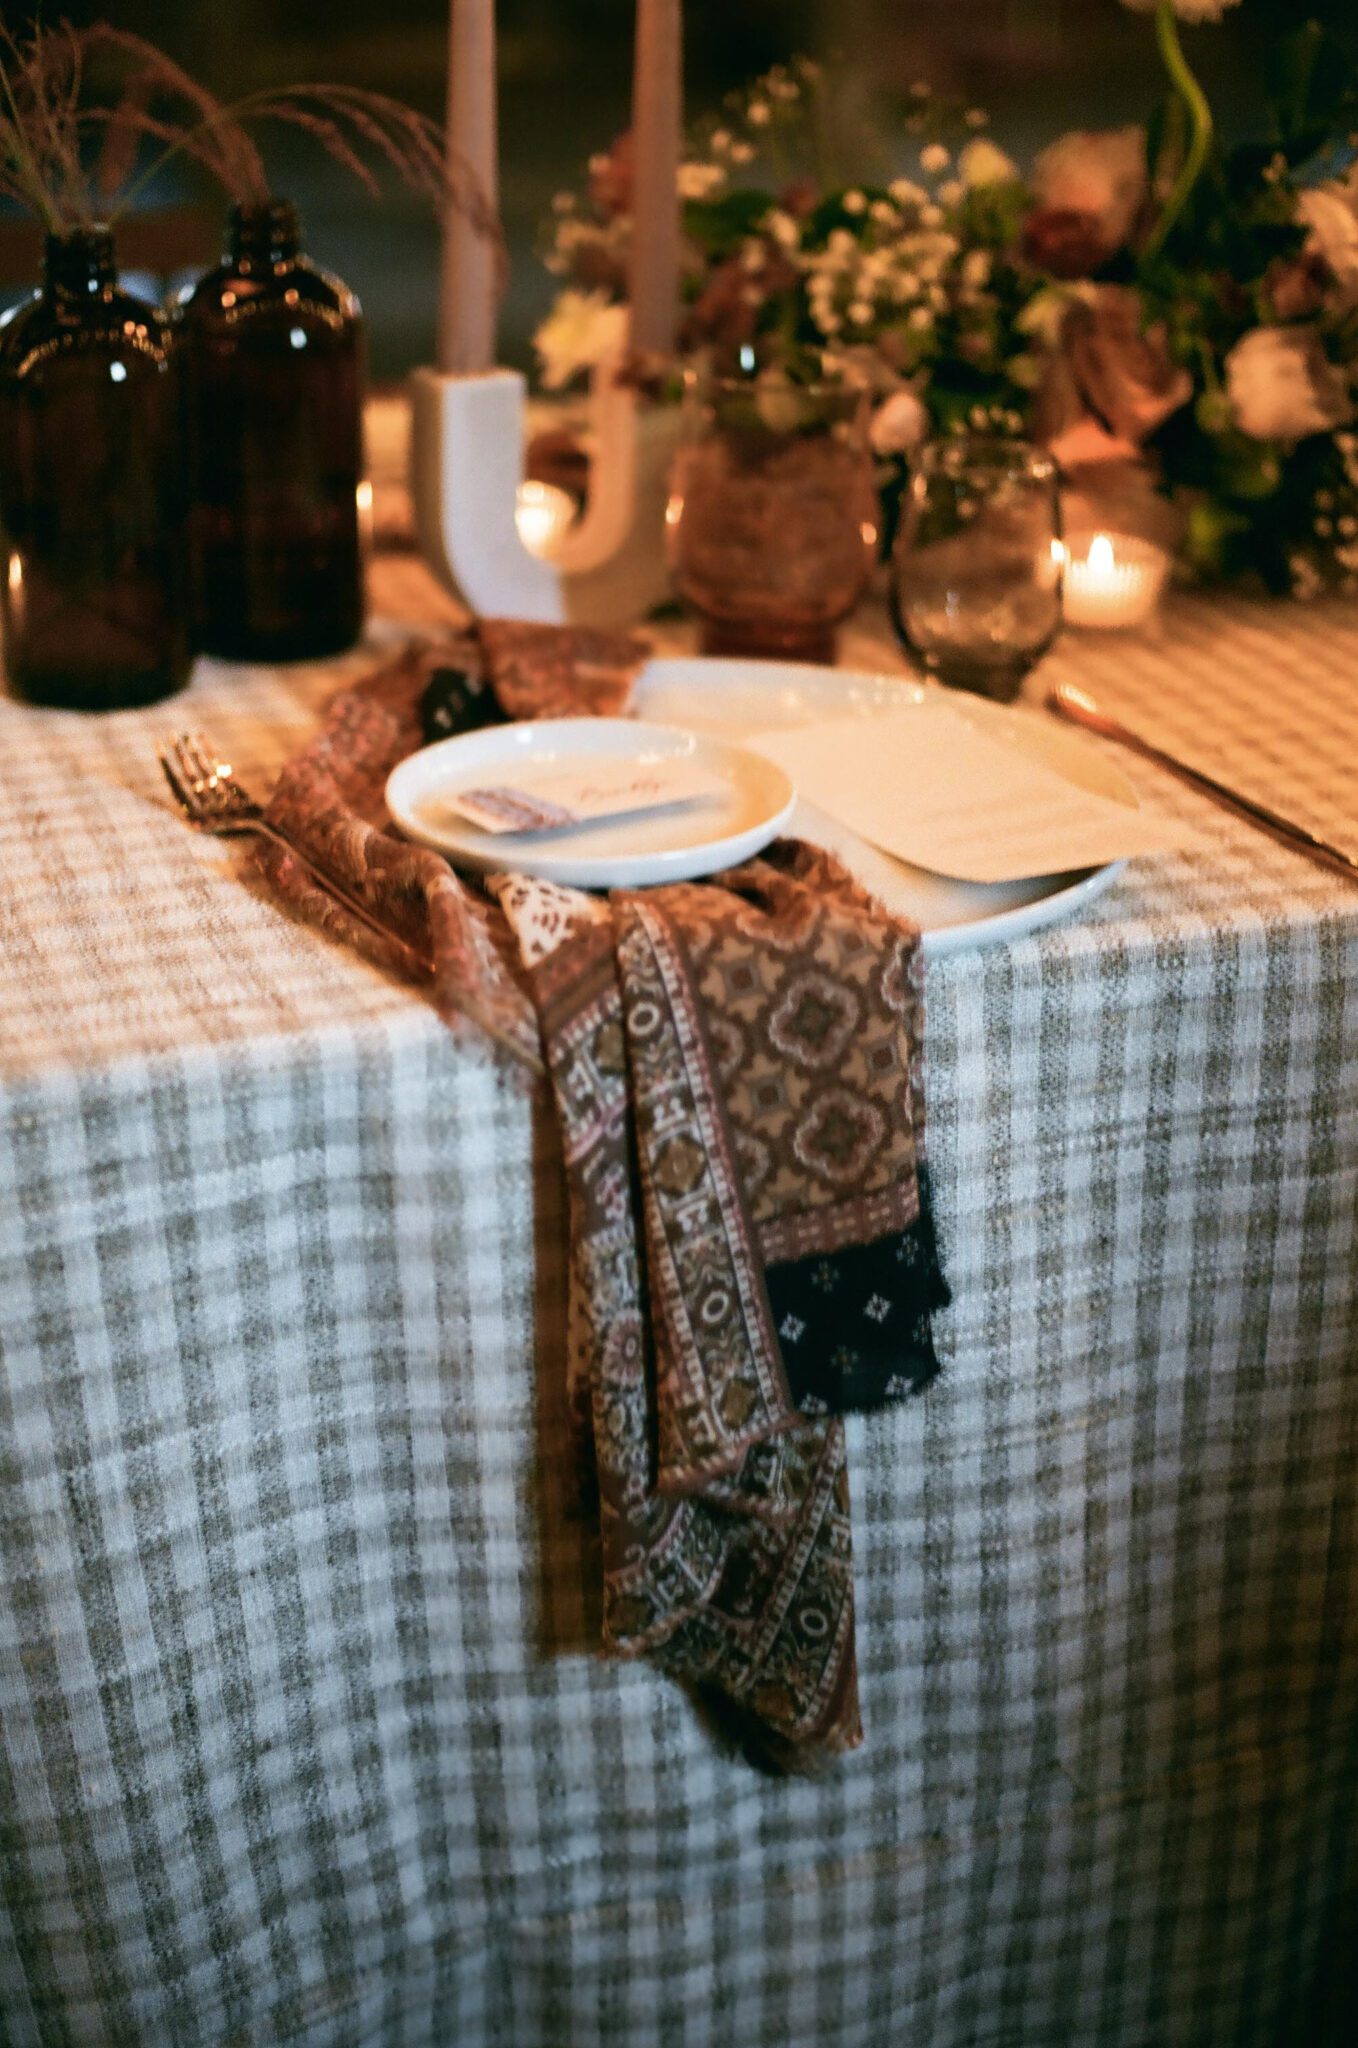 Country chic tablescape with patterned linen at wedding in Lethbridge, Alberta, moody candle-lit atmosphere.